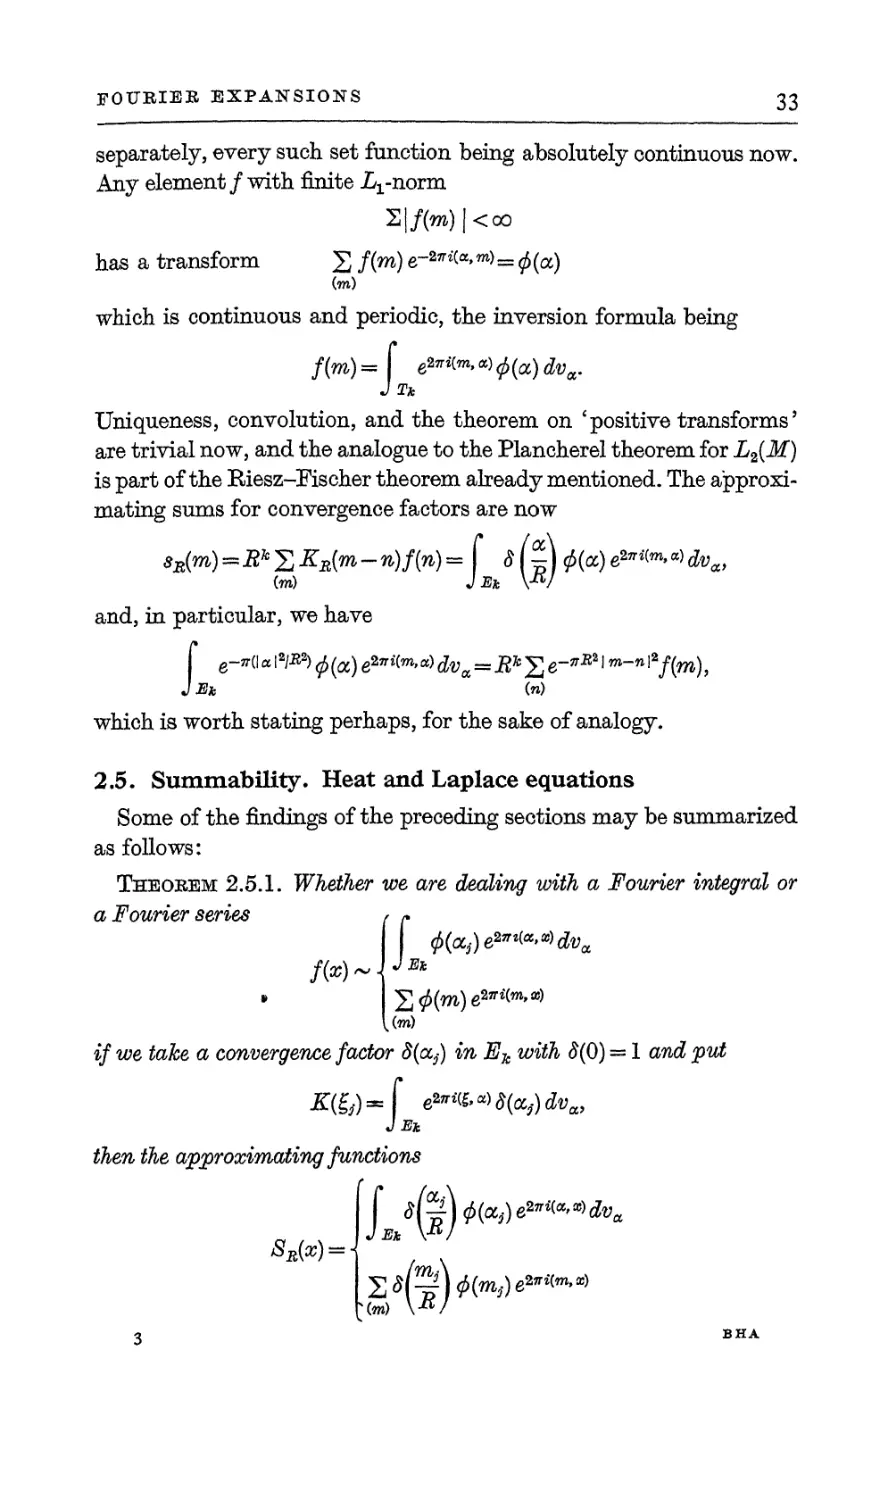 2.5. Summability. Heat and Laplace equations